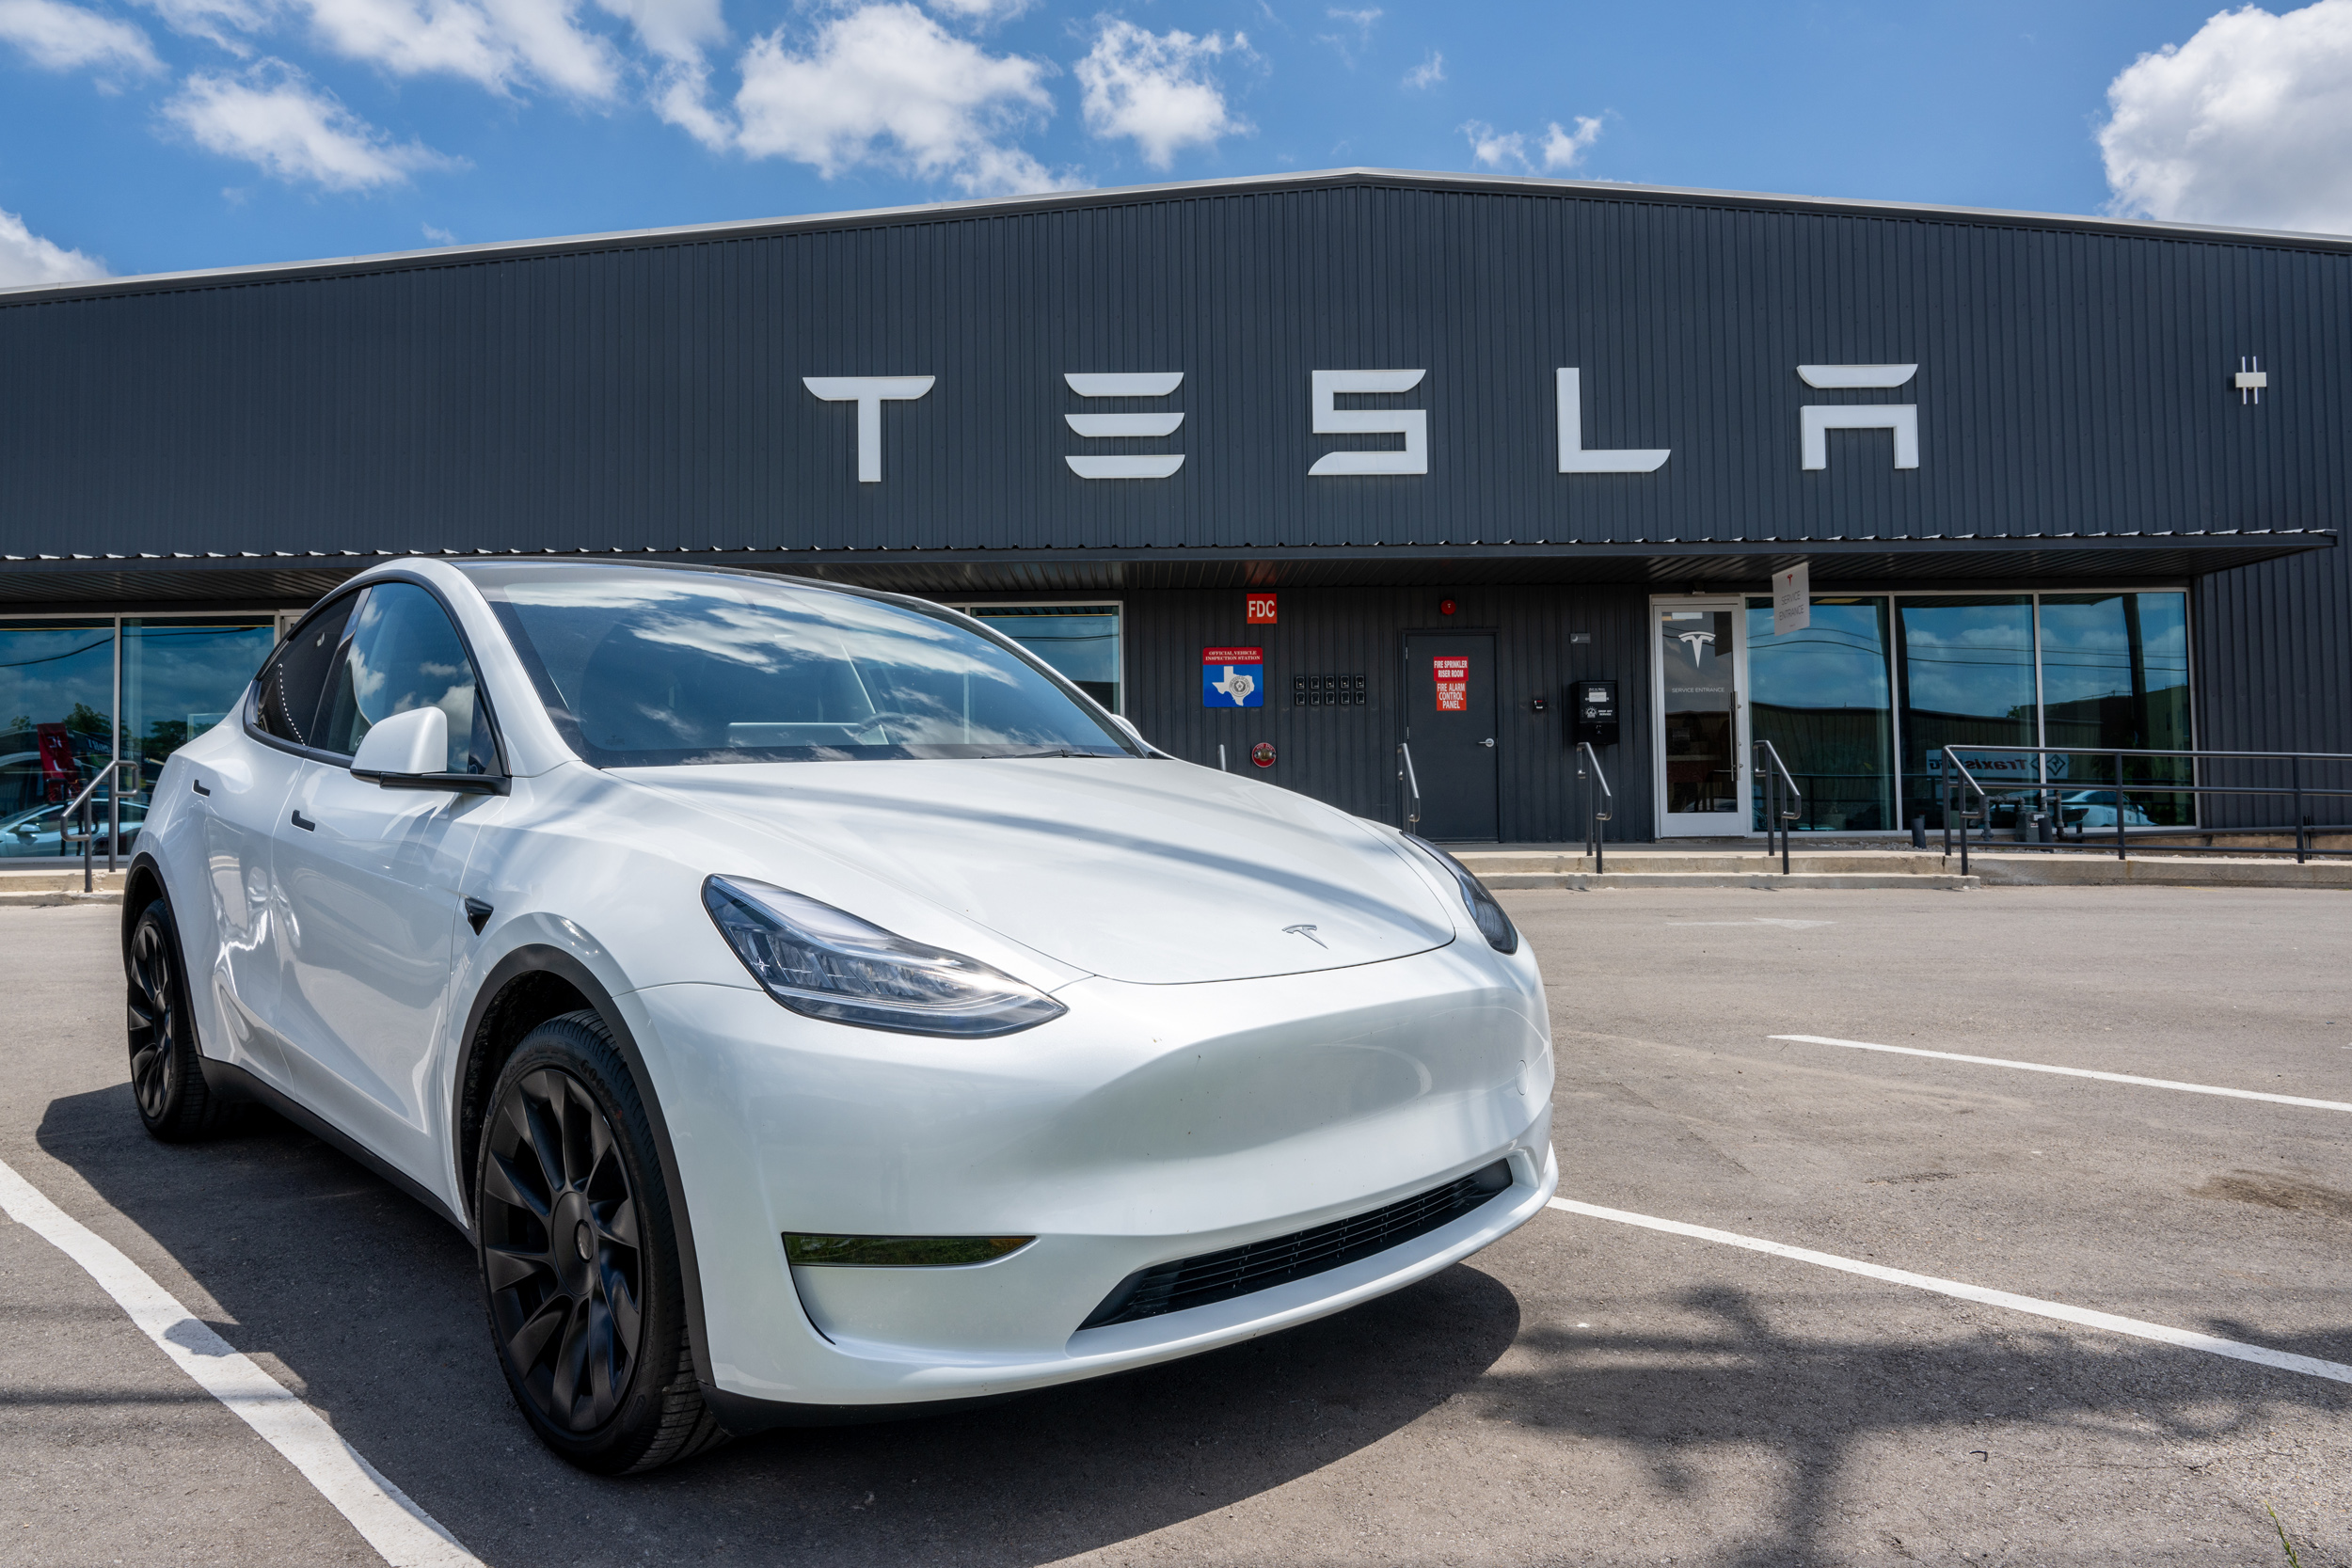 Why Are Tesla Cars So Expensive To Insure?